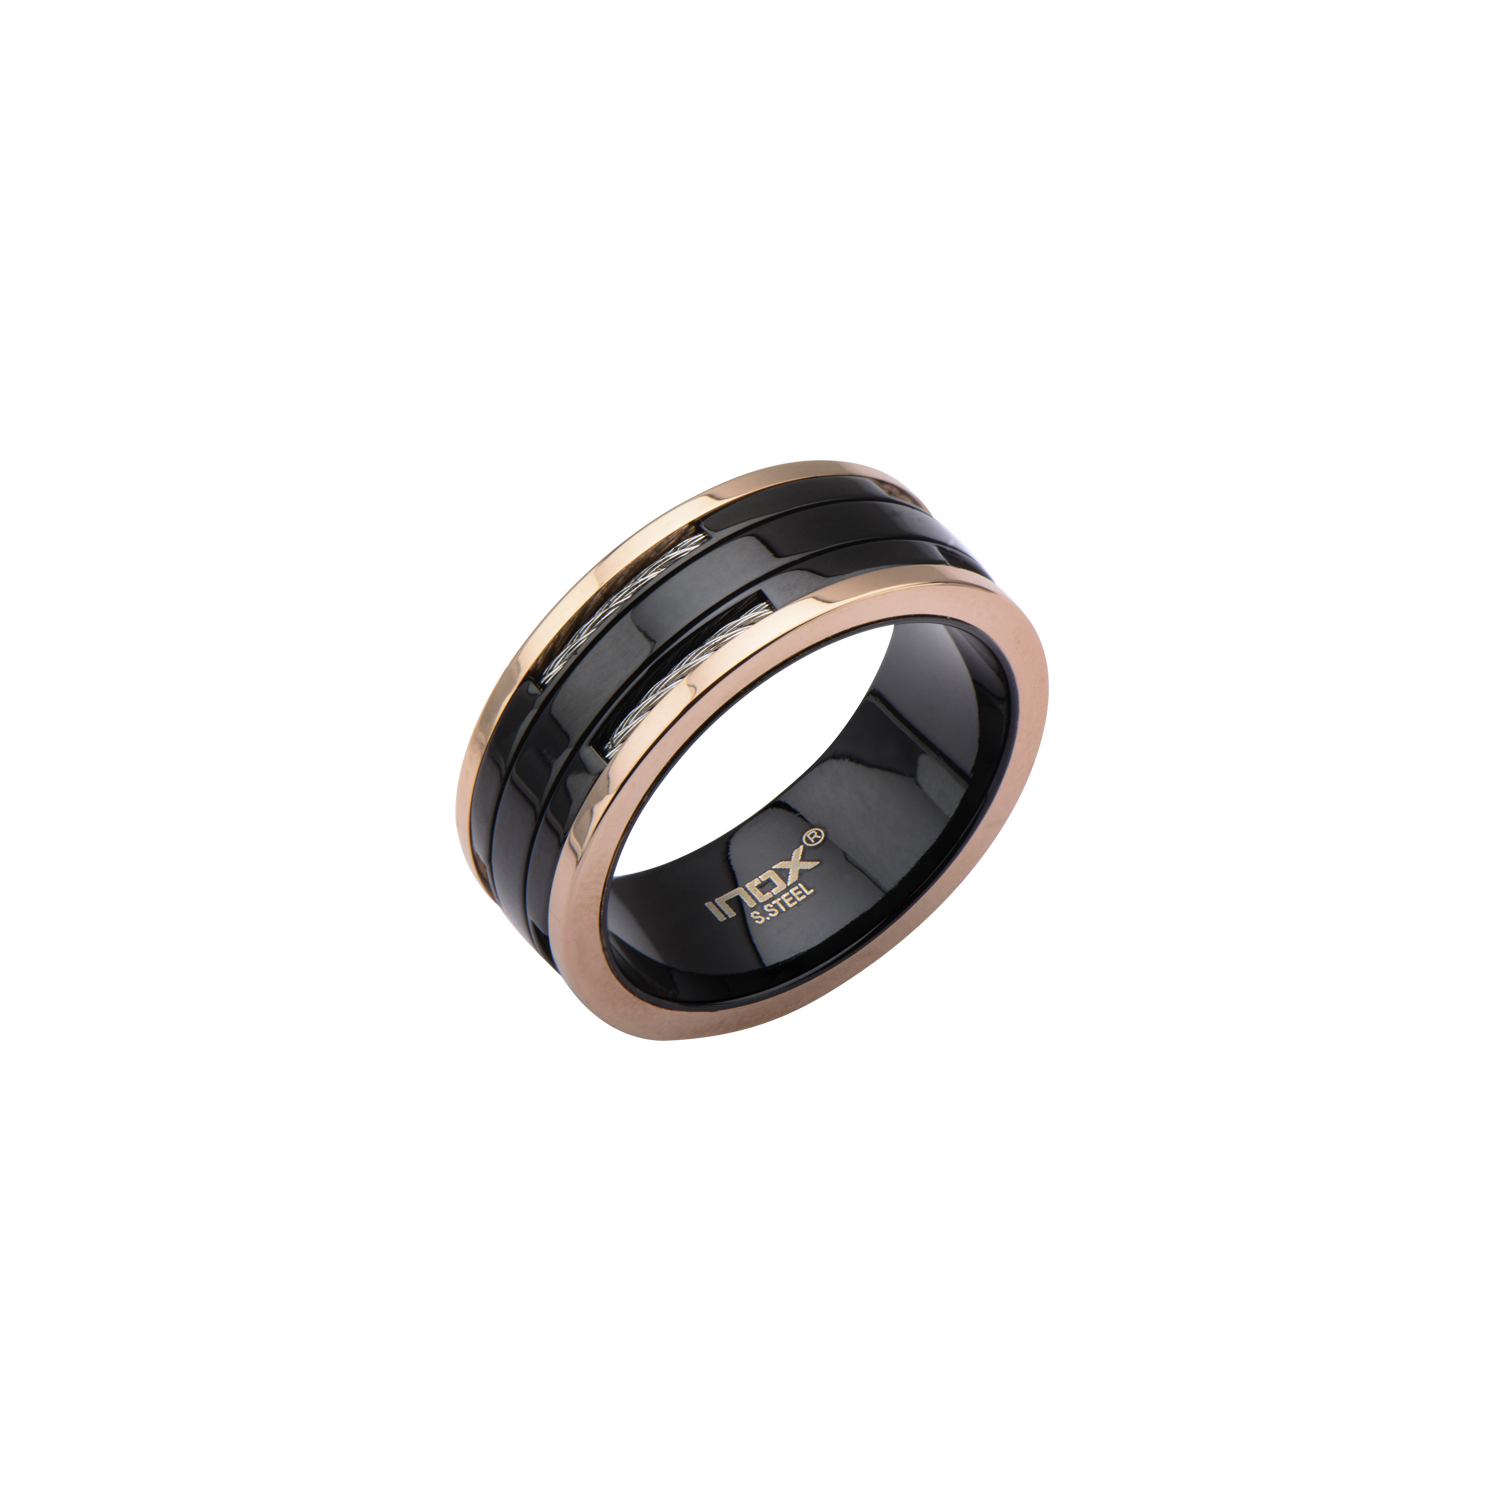 Black Plated and Rose Gold Plated Ring with Inlayed Cable Carroll / Ochs Jewelers Monroe, MI